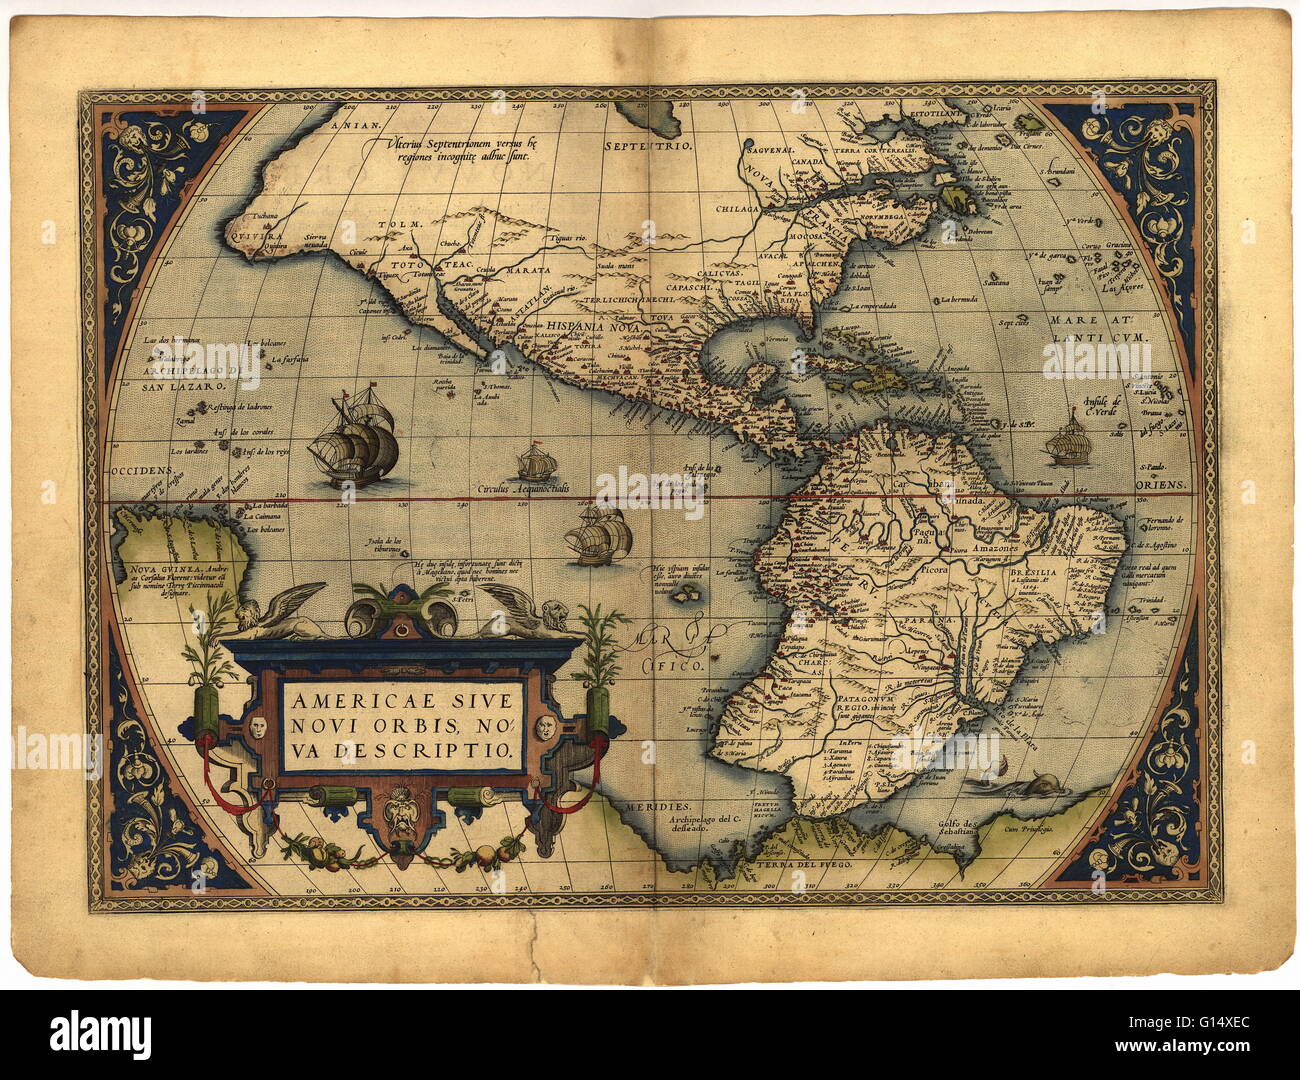 Map of the New World, in the 1570 edition of the Ortelius Atlas (Theatrum Orbis Terrarum). Abraham Ortelius (1527-1598) was a Flemish mapmaker who is considered to have produced the first true atlas (collection of uniform maps in one book). Ortelius worke Stock Photo